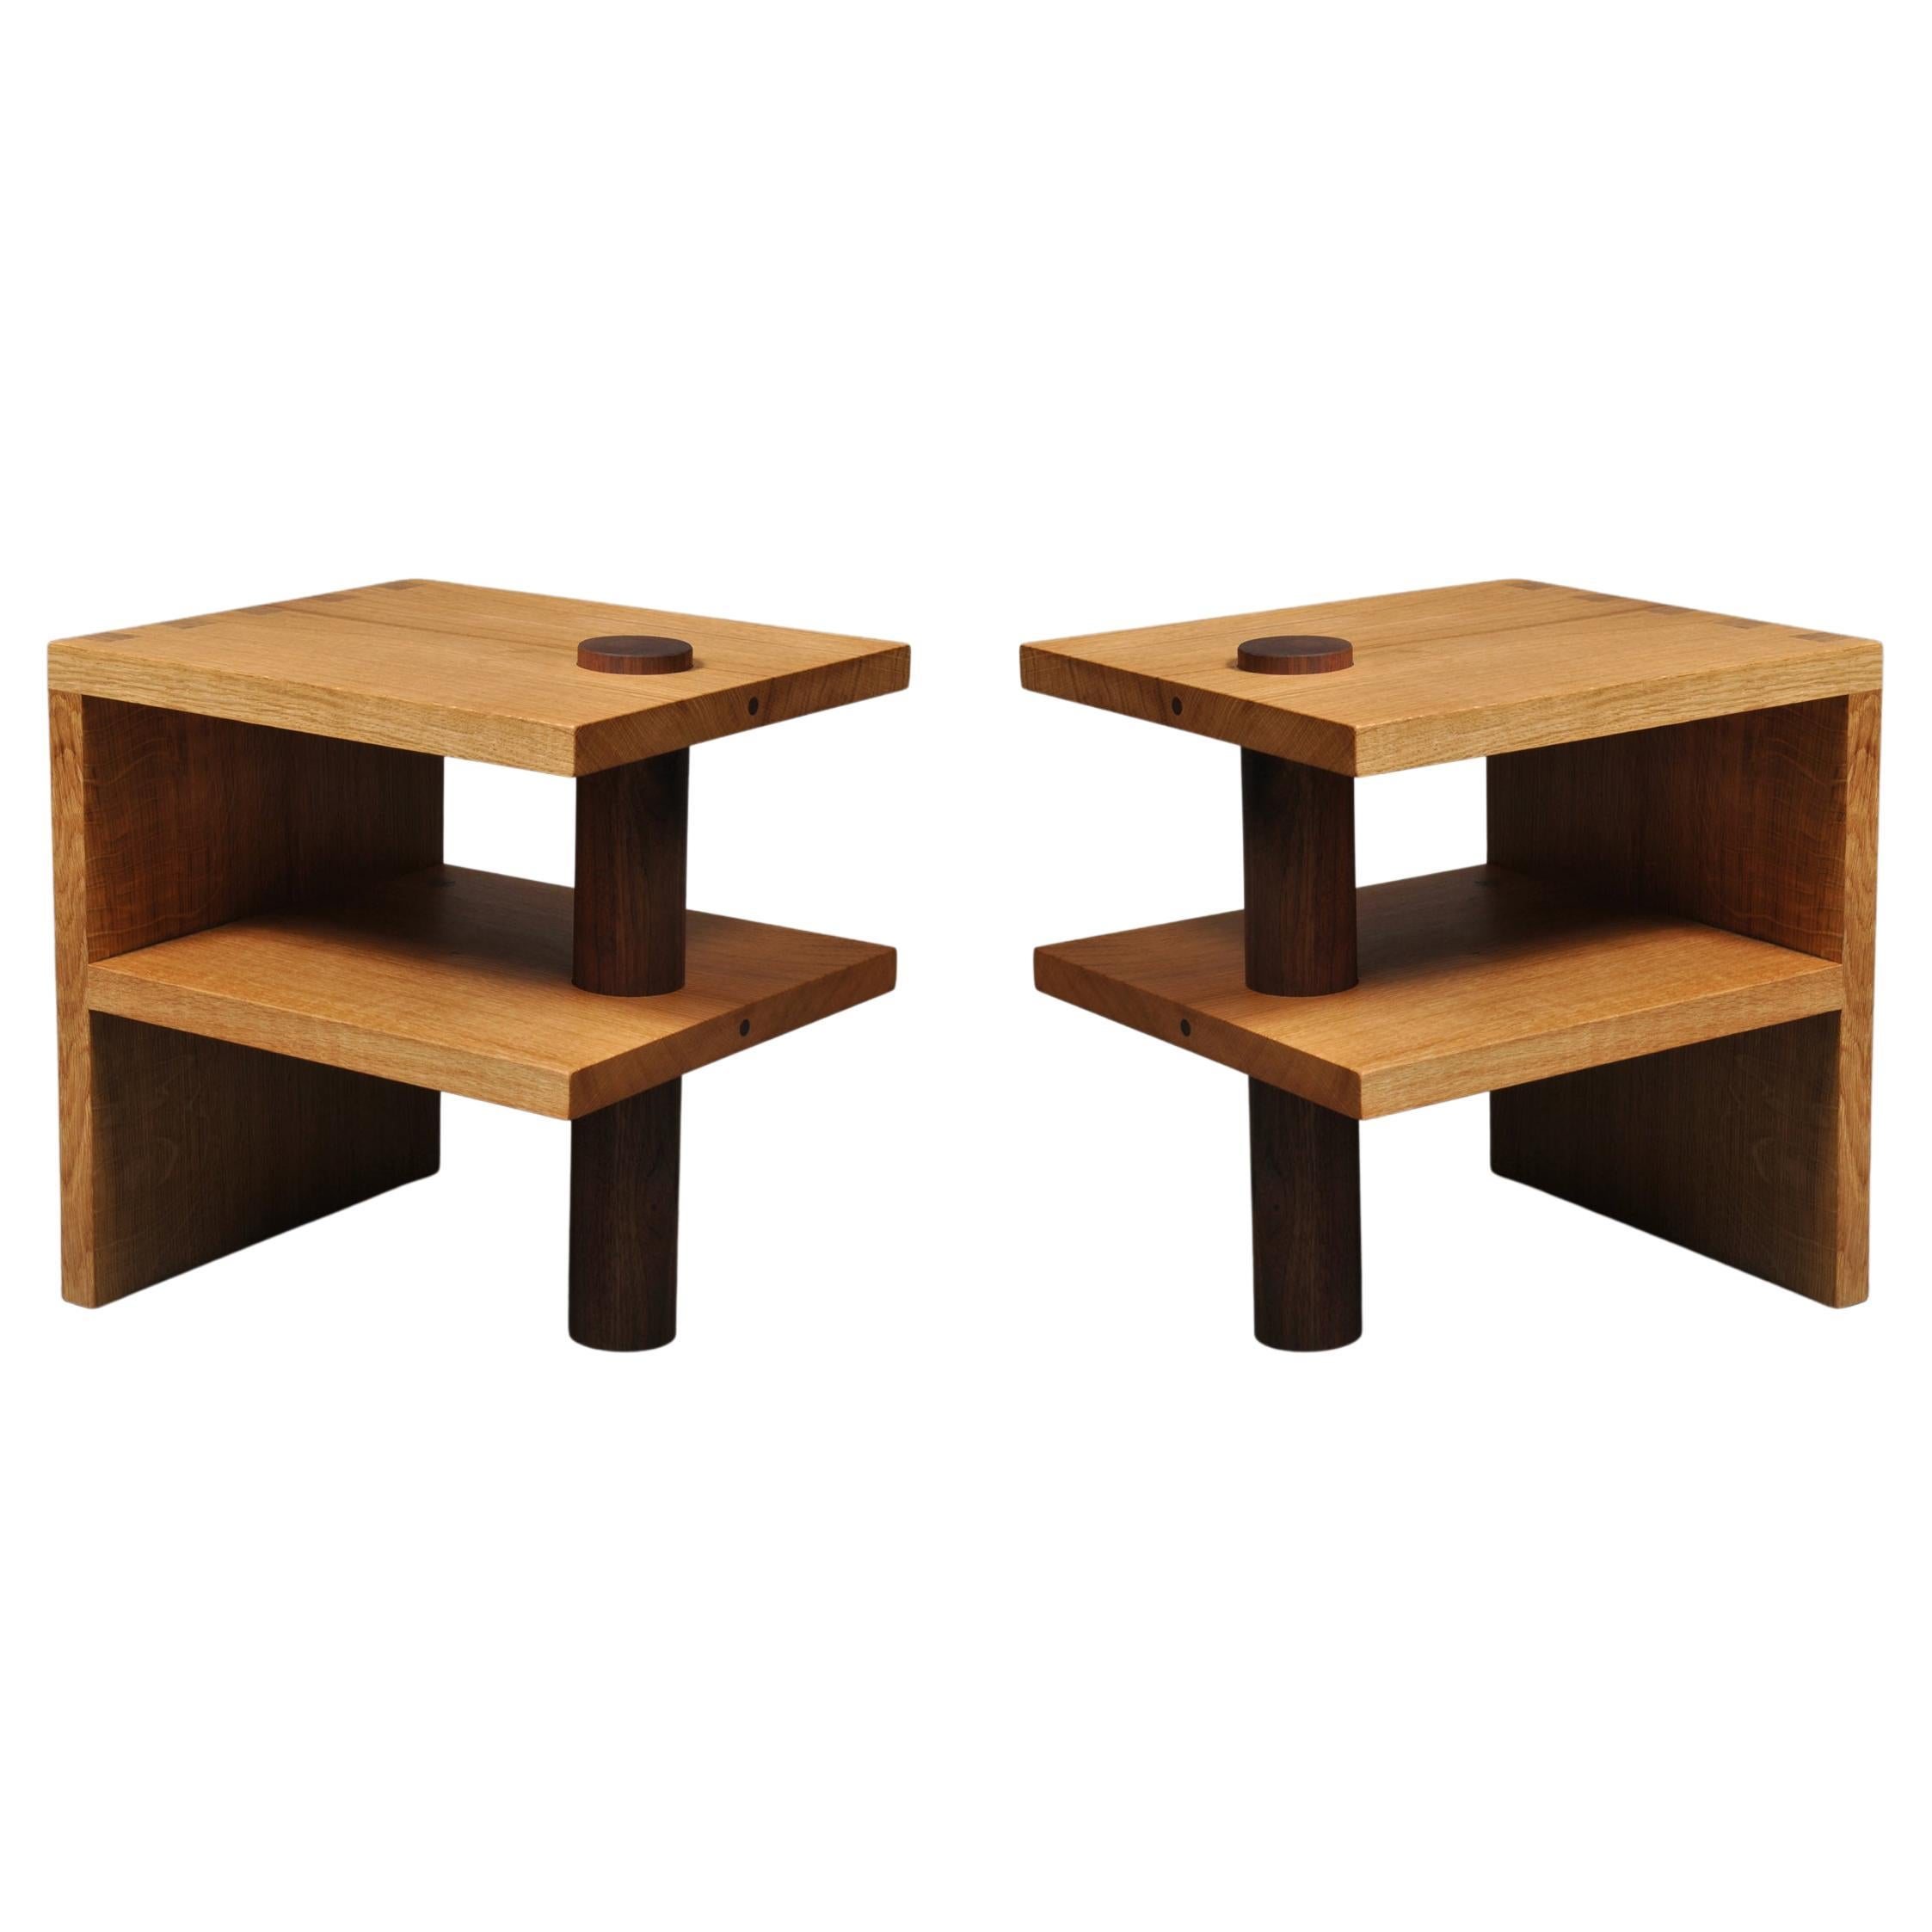 Pair of Handcrafted Oak & Walnut Tables For Sale